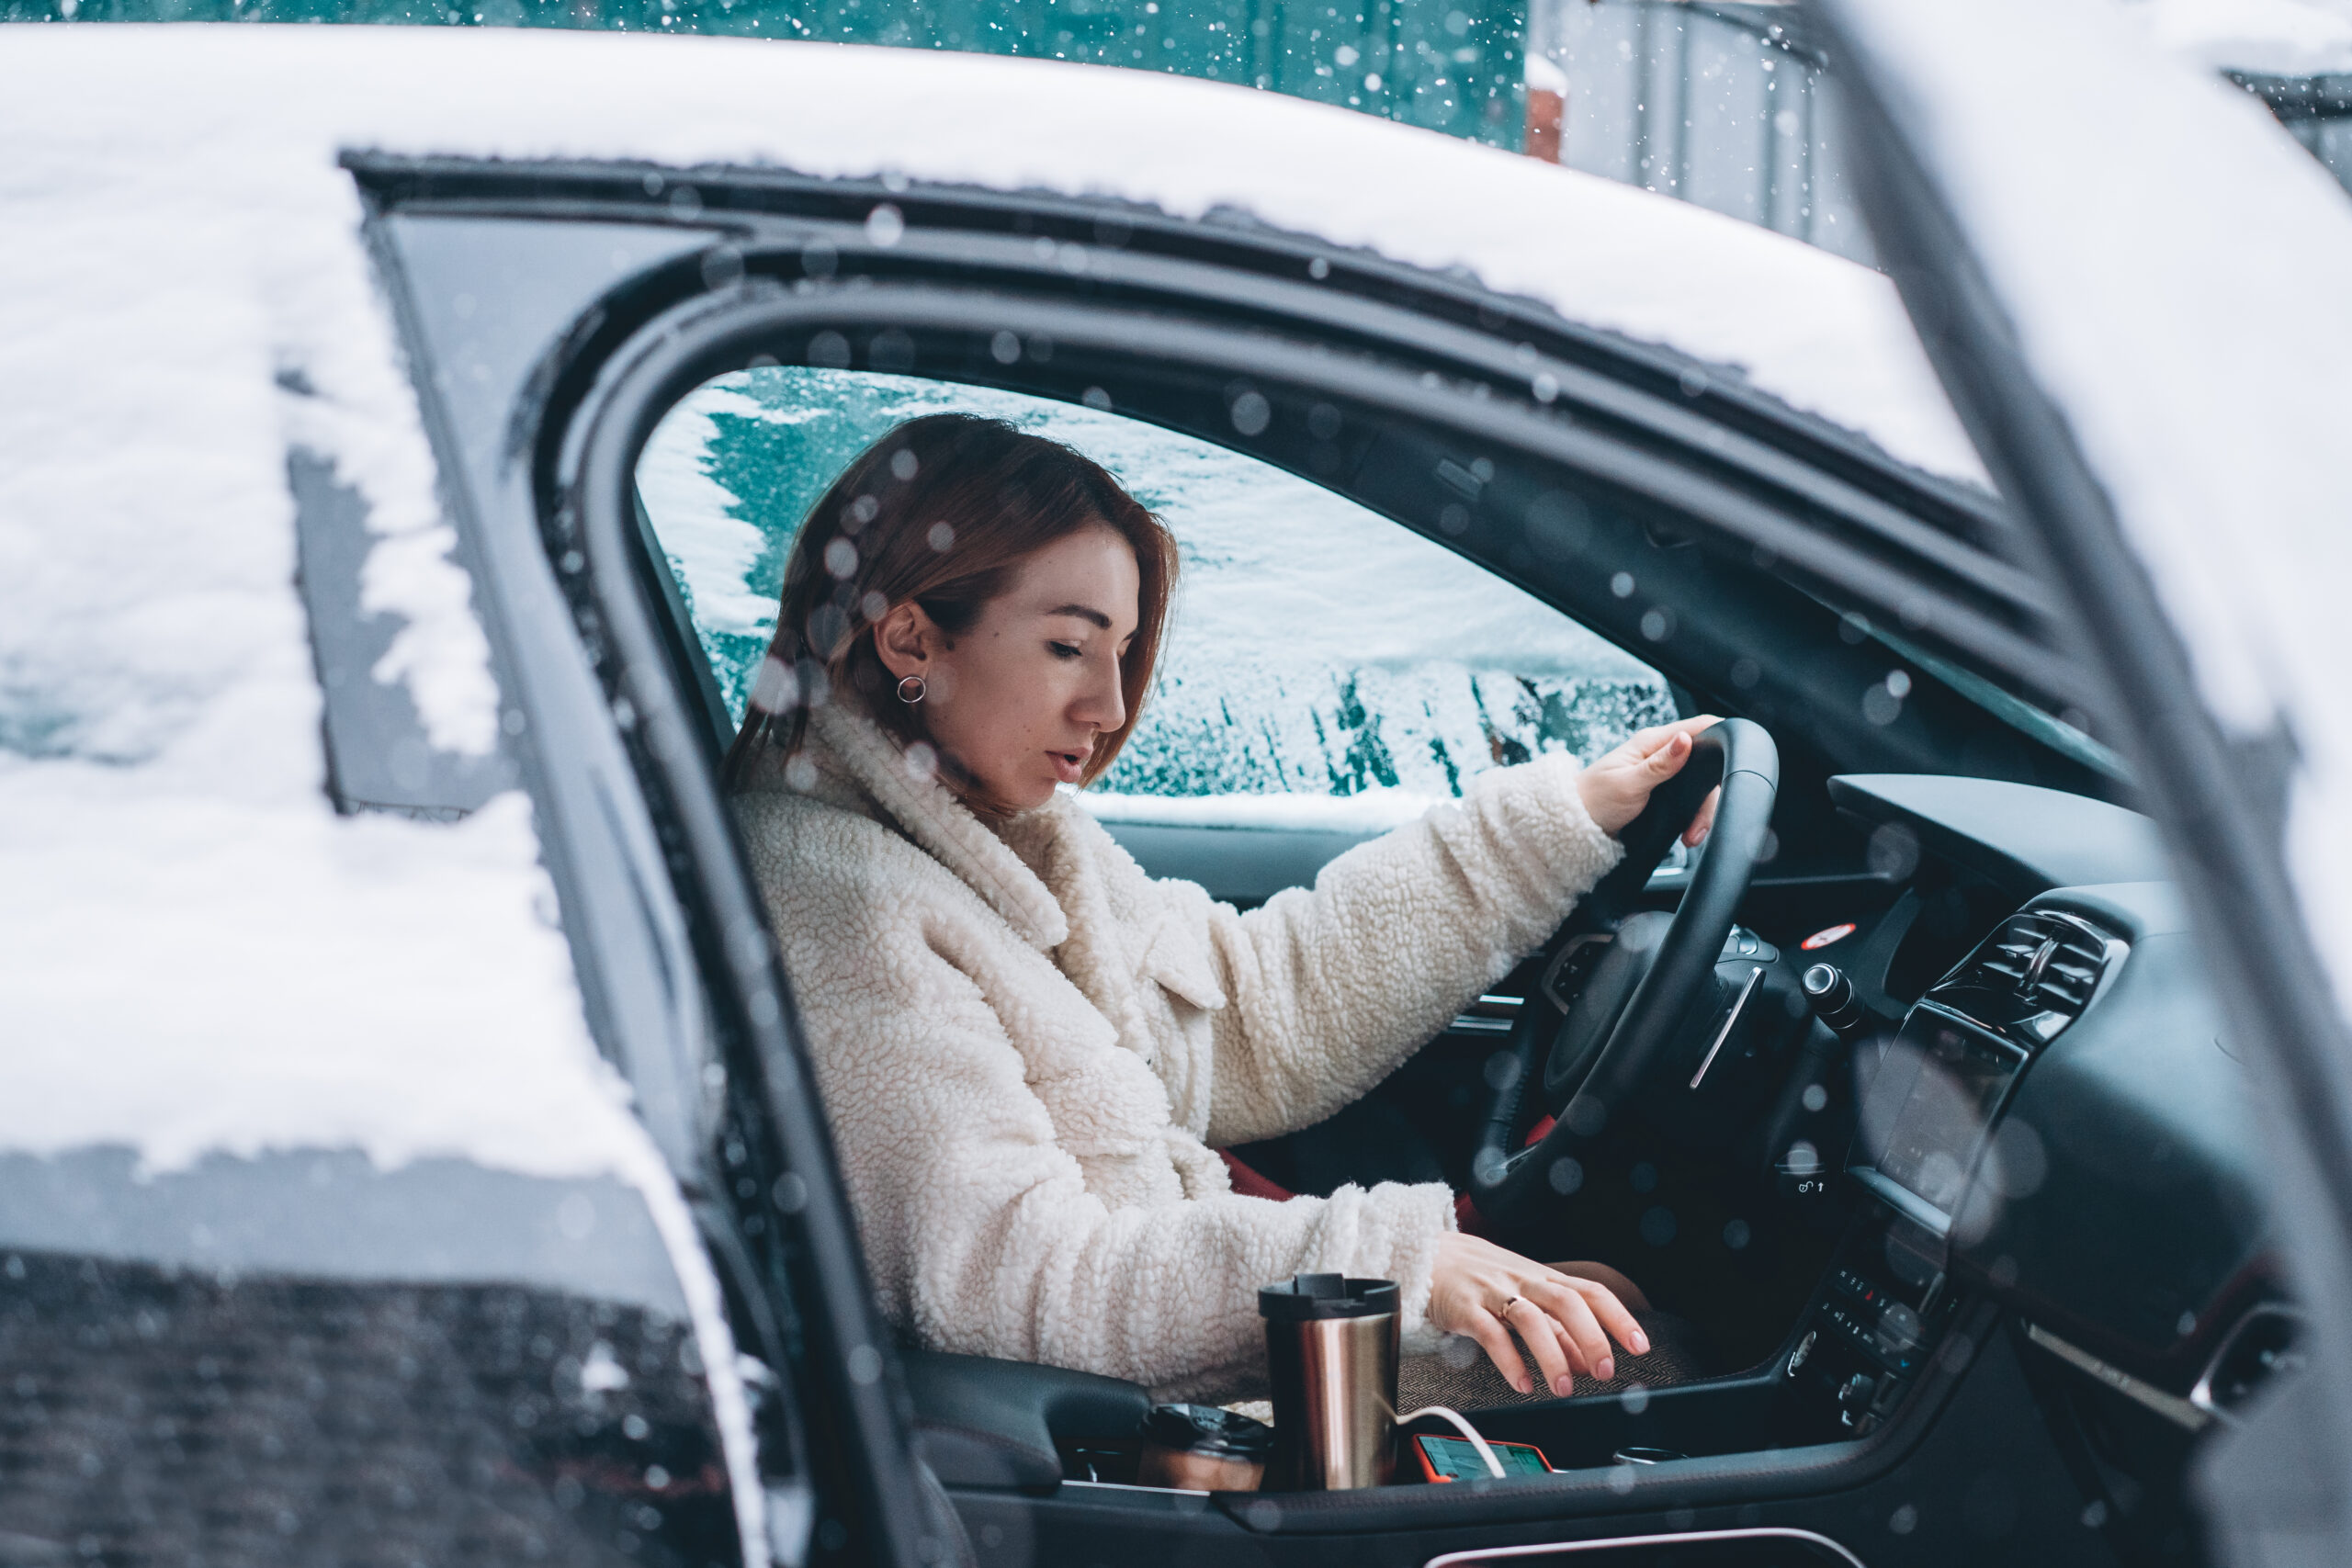 Keeping Safe While Driving in a Snow Storm